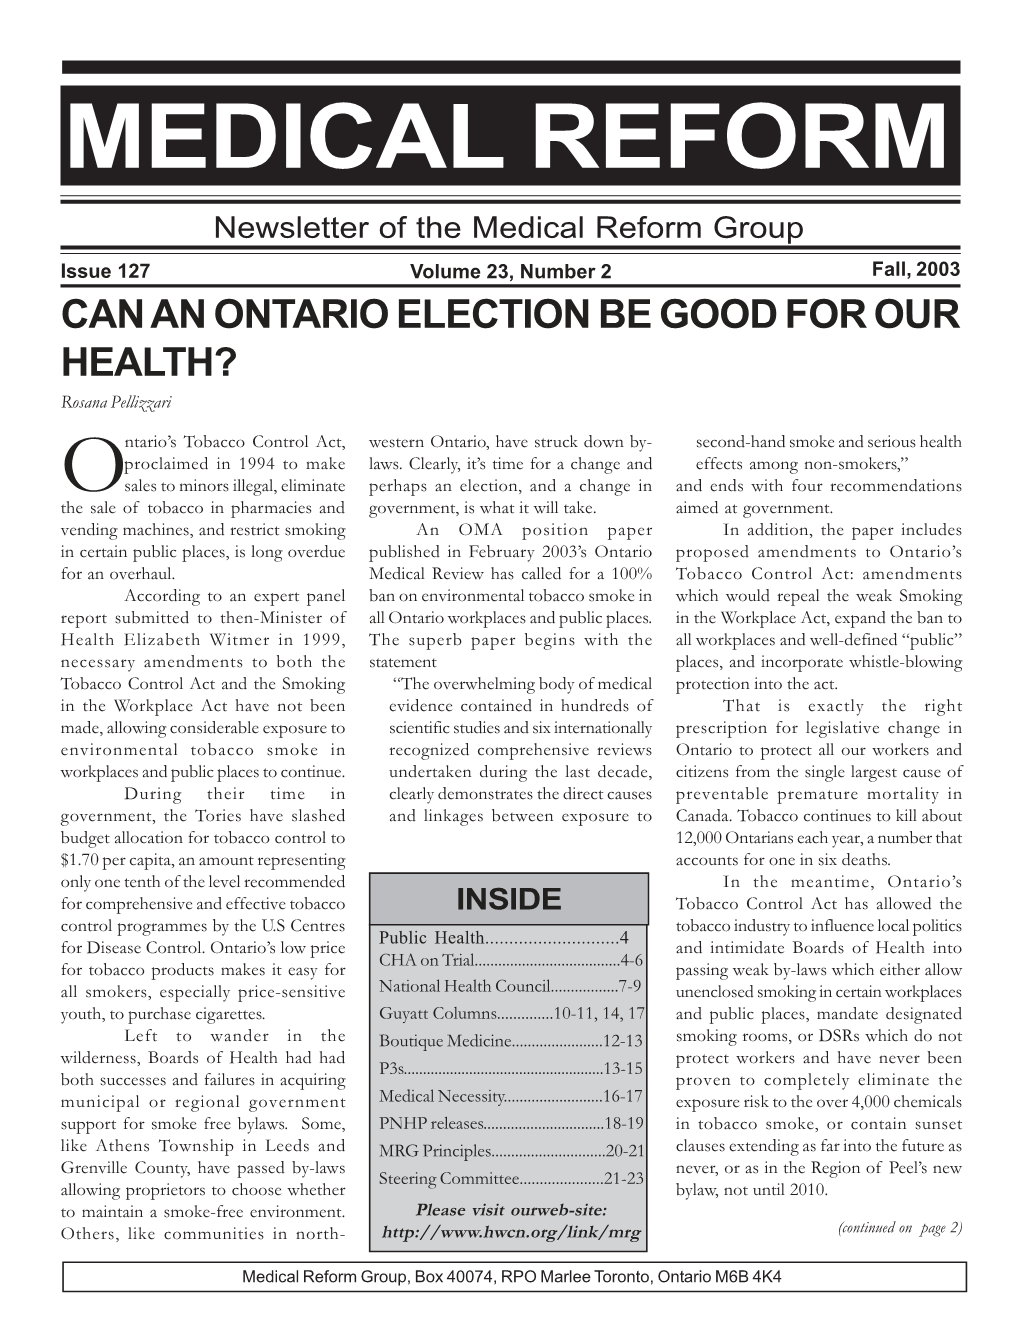 MEDICAL REFORM Newsletter of the Medical Reform Group Issue 127 Volume 23, Number 2 Fall, 2003 CAN an ONTARIO ELECTION BE GOOD for OUR HEALTH? Rosana Pellizzari